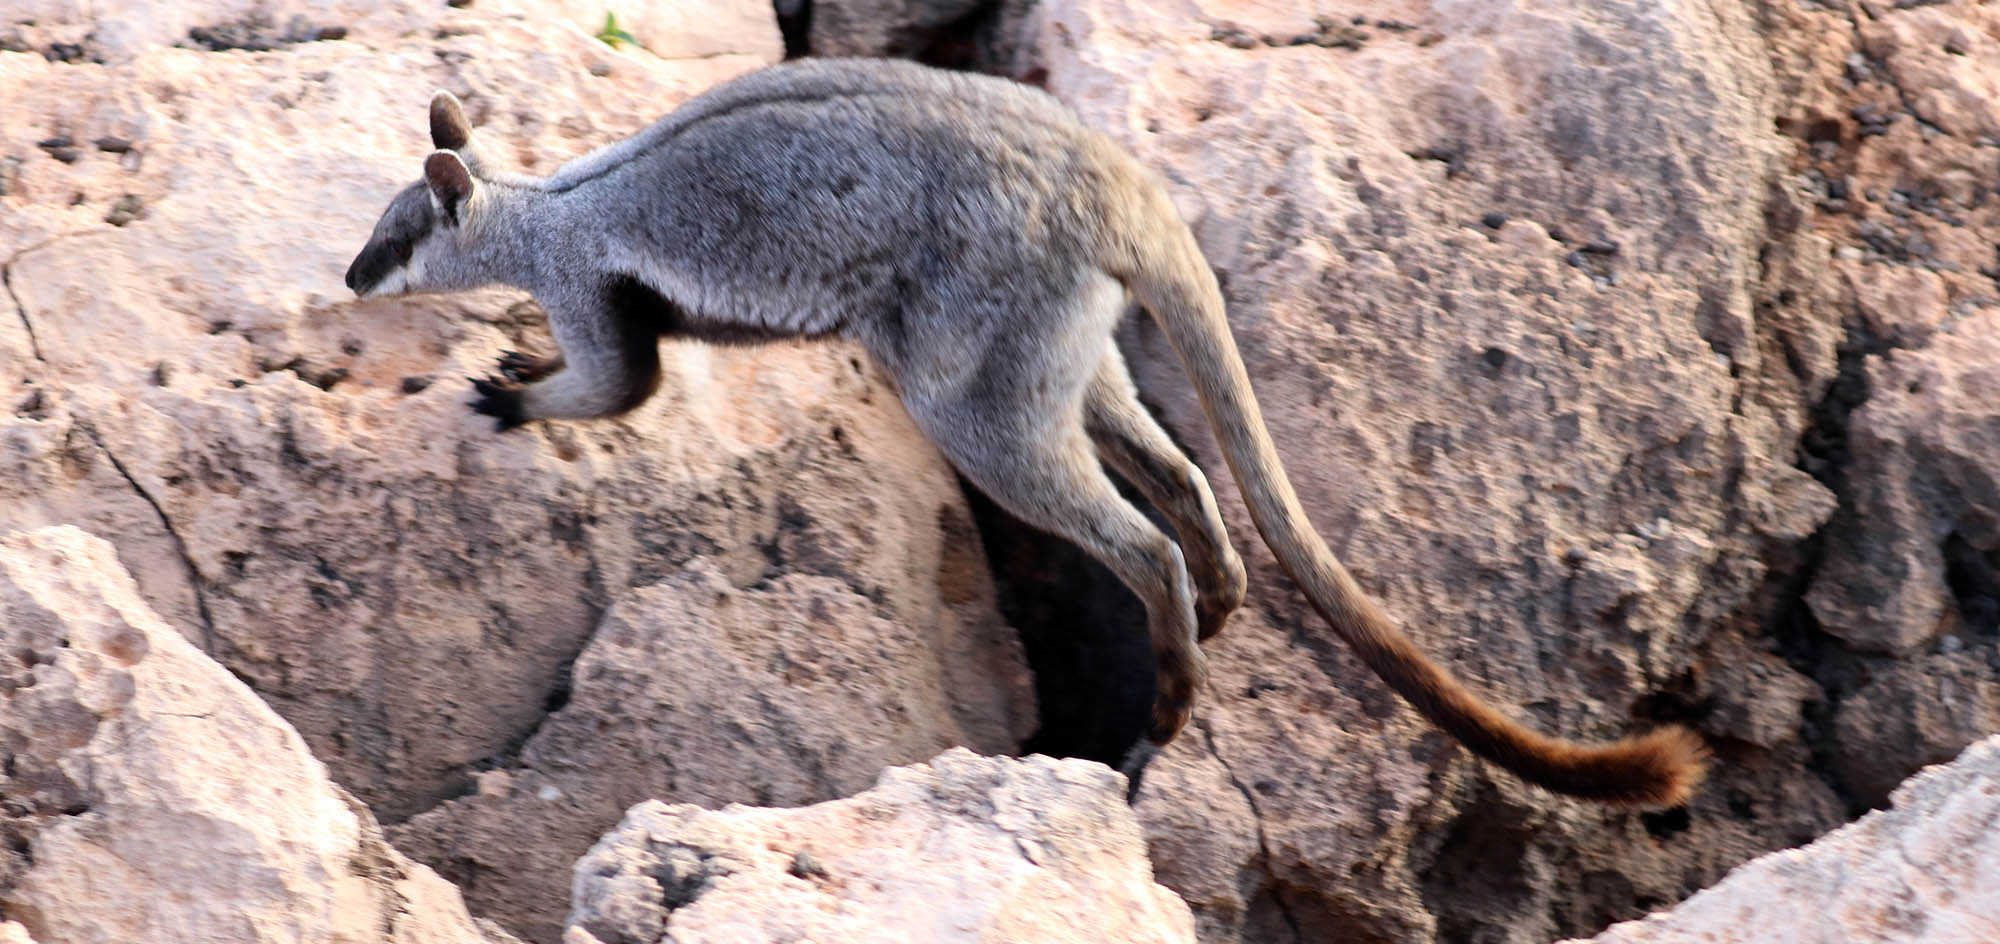 rock-wallaby-leaping-cape-range